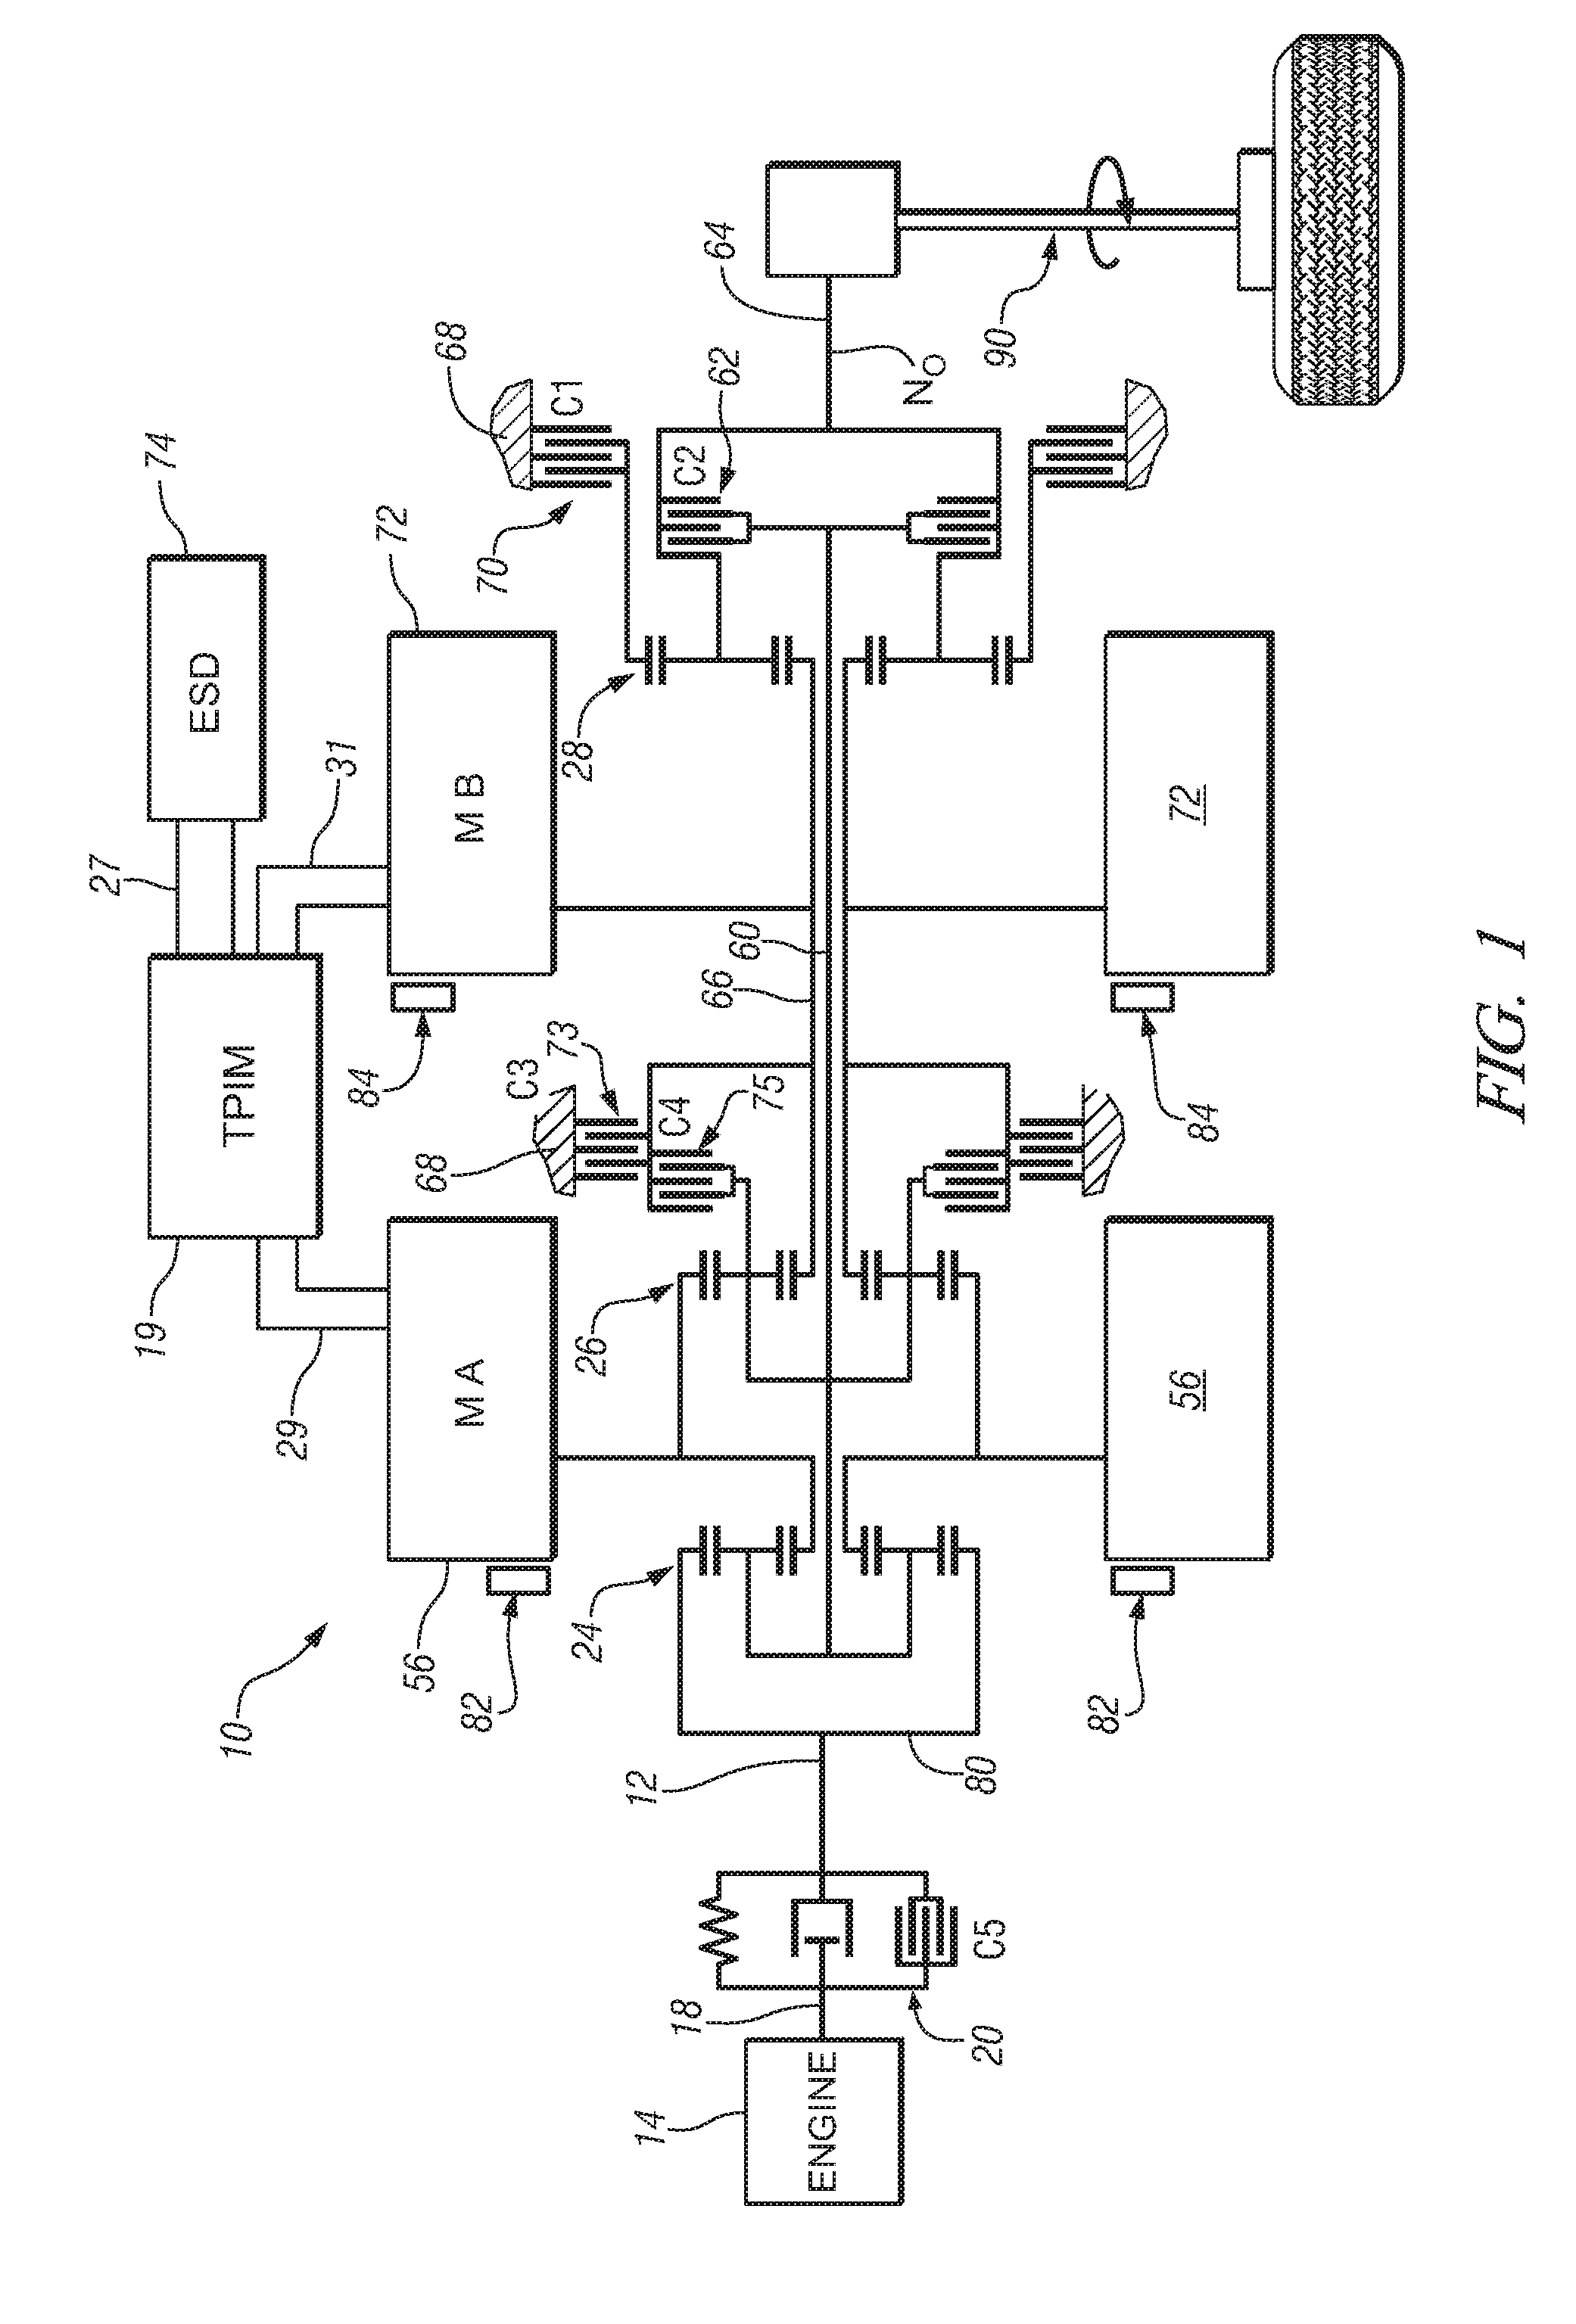 Method and apparatus to control engine restart for a hybrid powertrain system